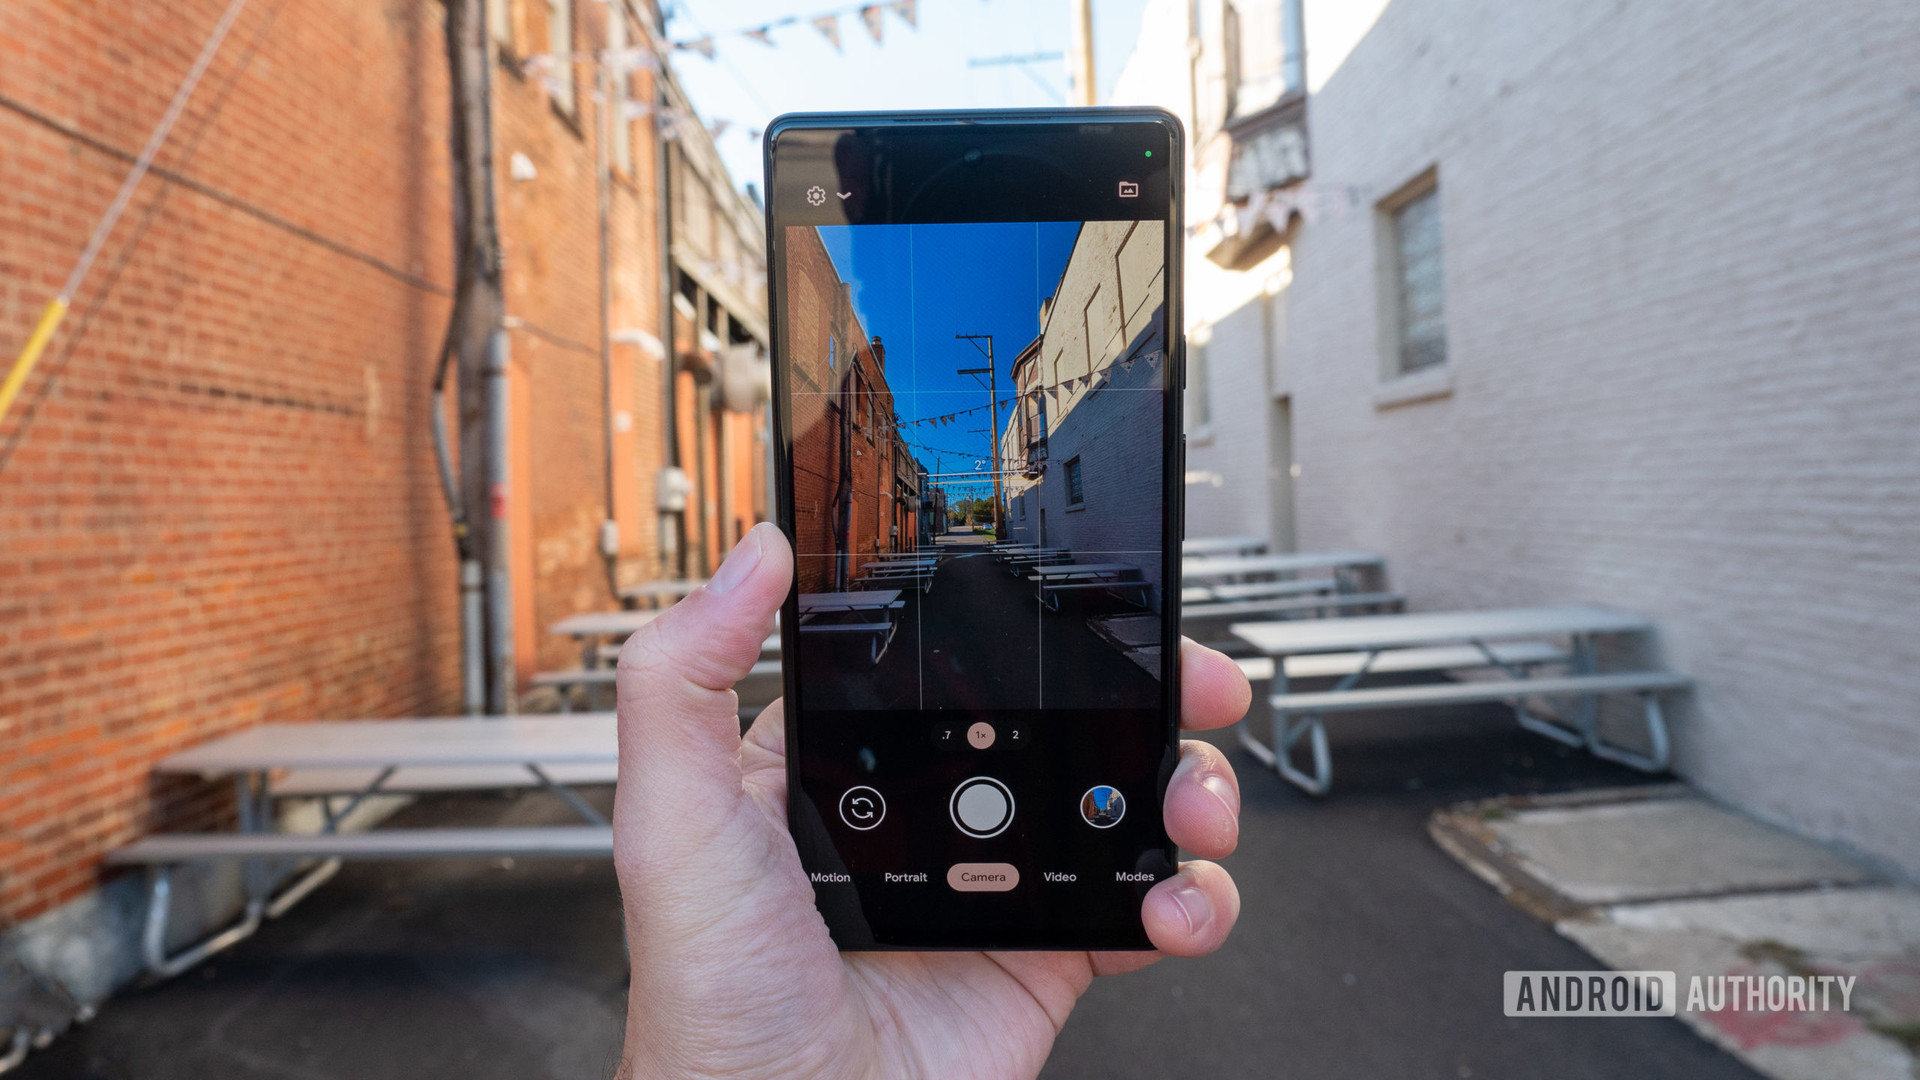 The Google Pixel 6 in an alley showing the camera app